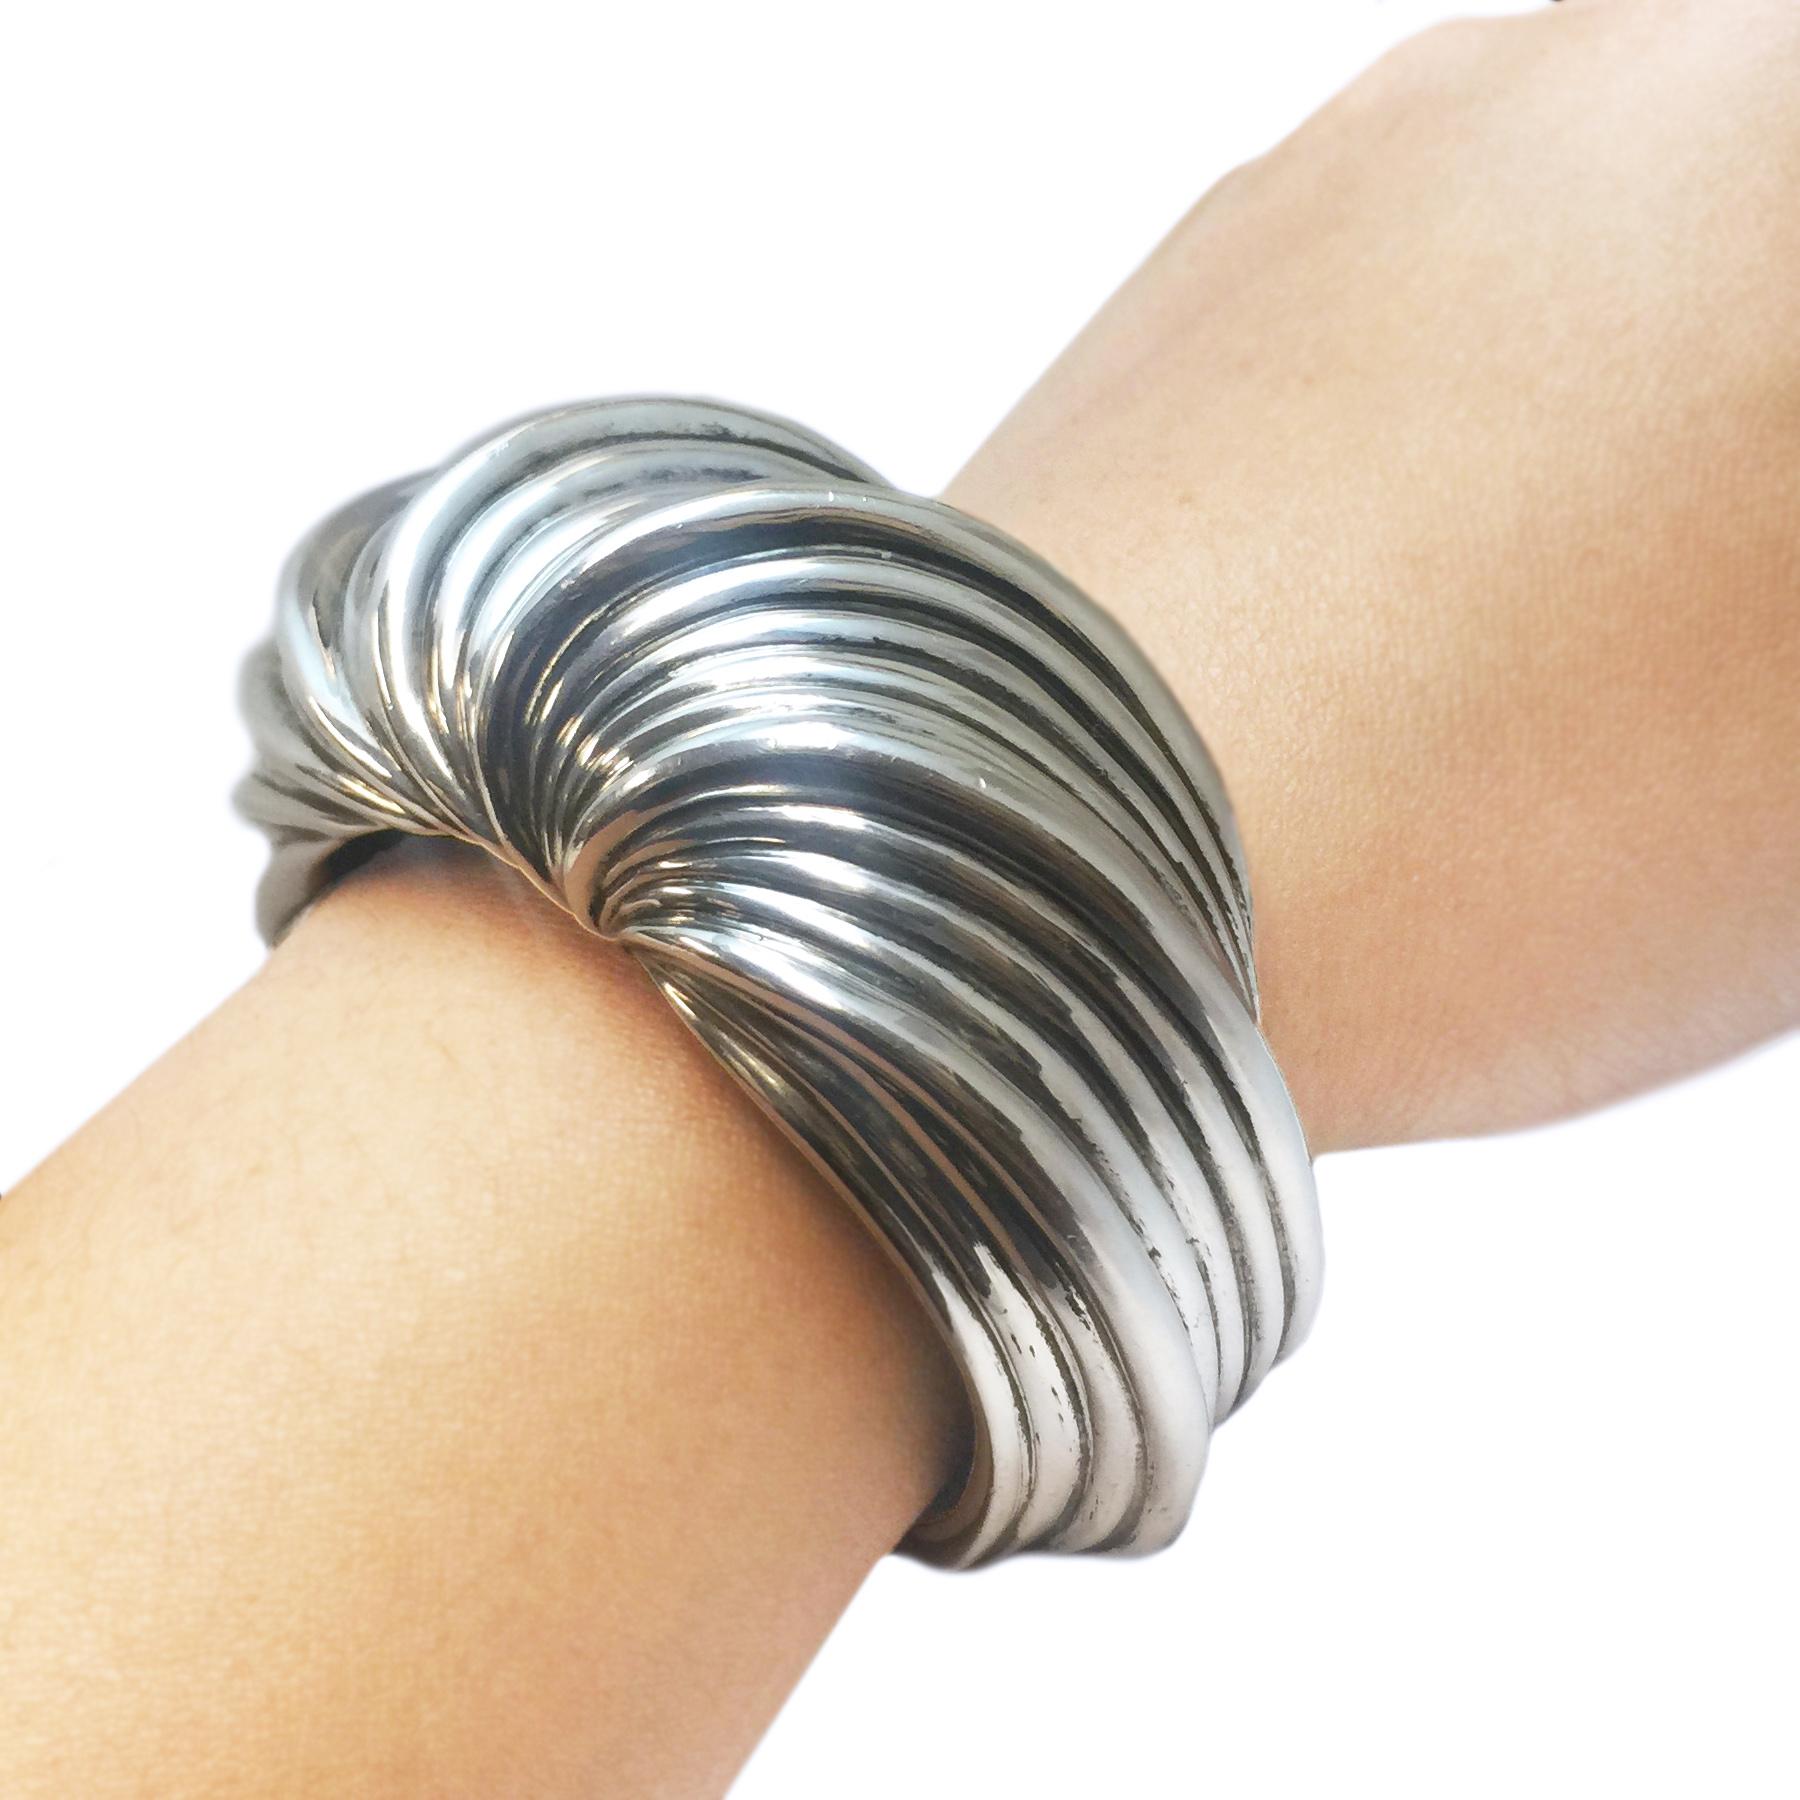 Judith Leiber Large Silver Cuff Bracelet In Excellent Condition For Sale In Chicago, IL